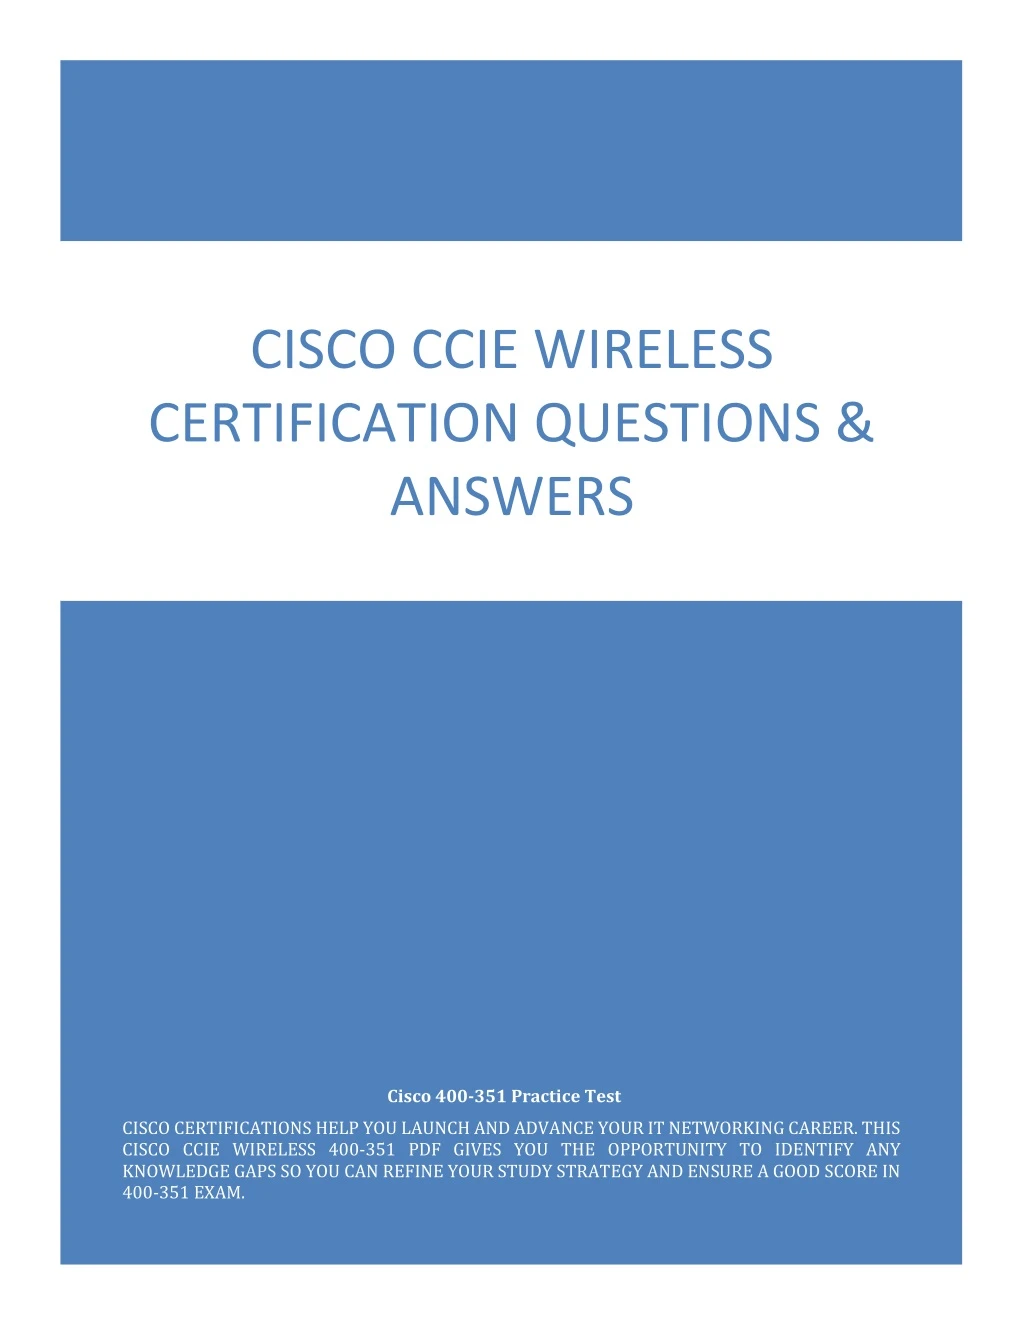 cisco ccie wireless certification questions